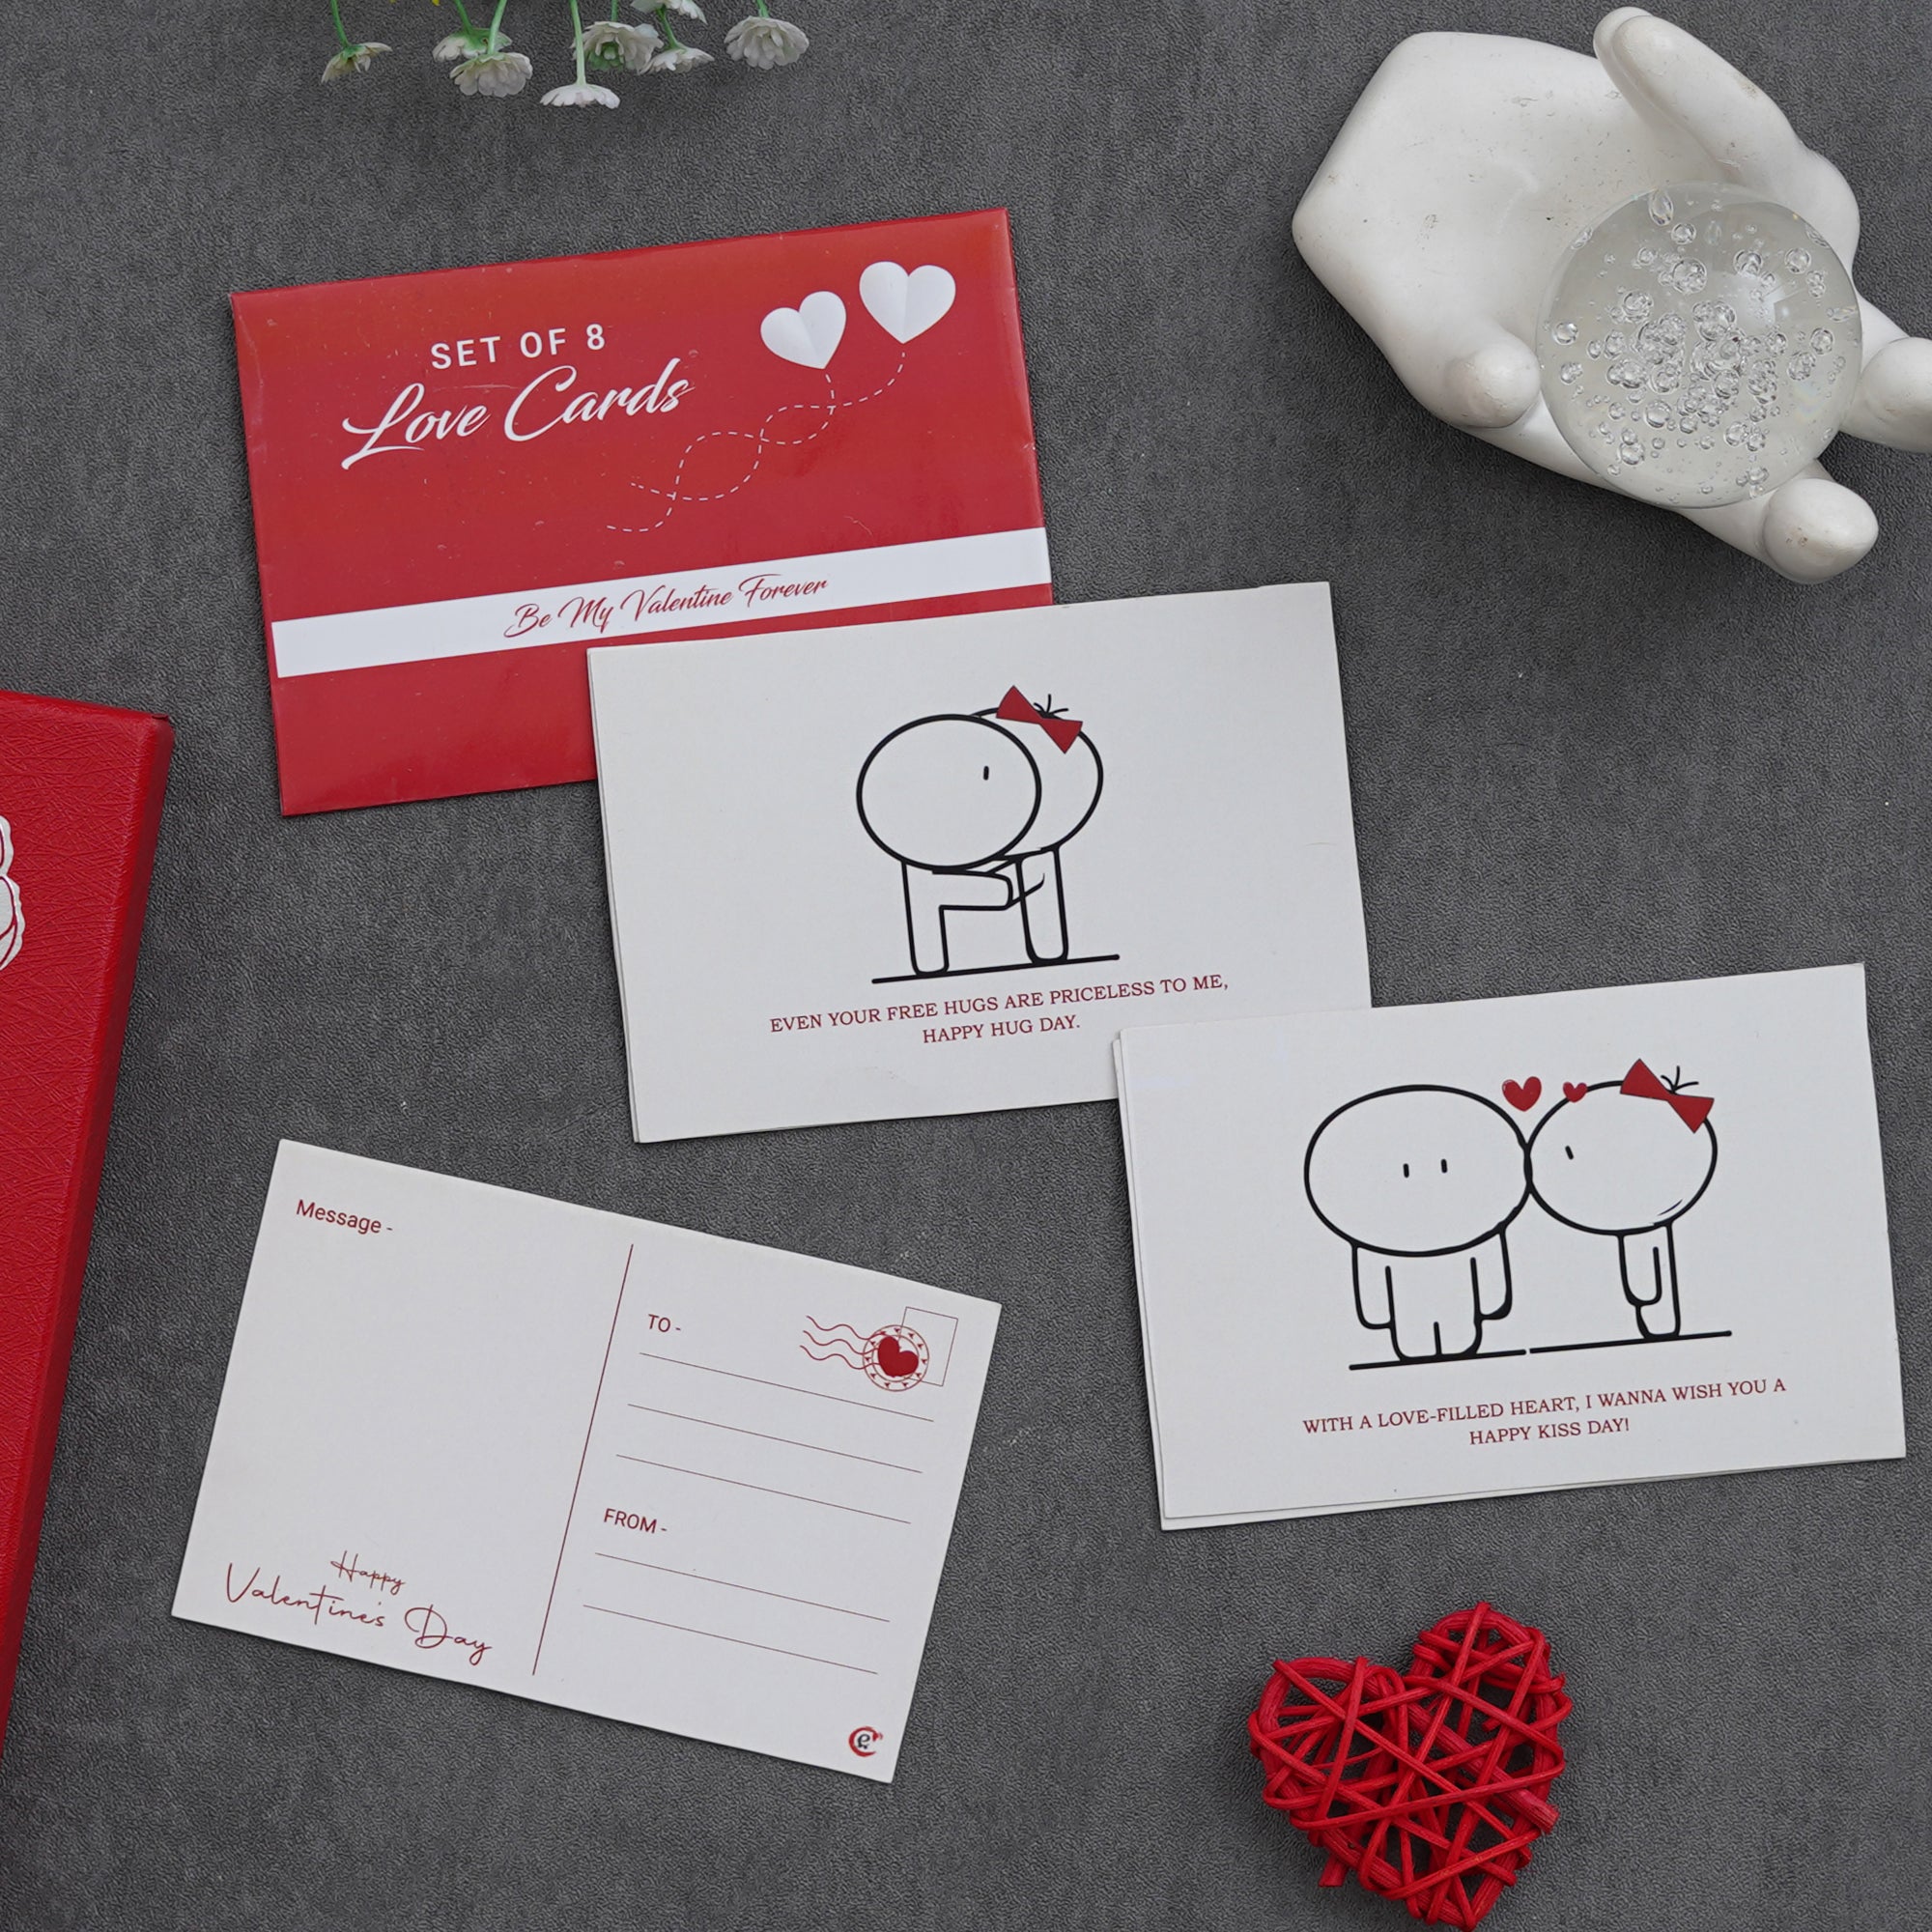 Valentine Combo of Set of 8 Love Post Cards Gift Cards Set, Red Gift Box with Teddy & Roses, Red and White Heart Hugging Each Other Gift Set 1